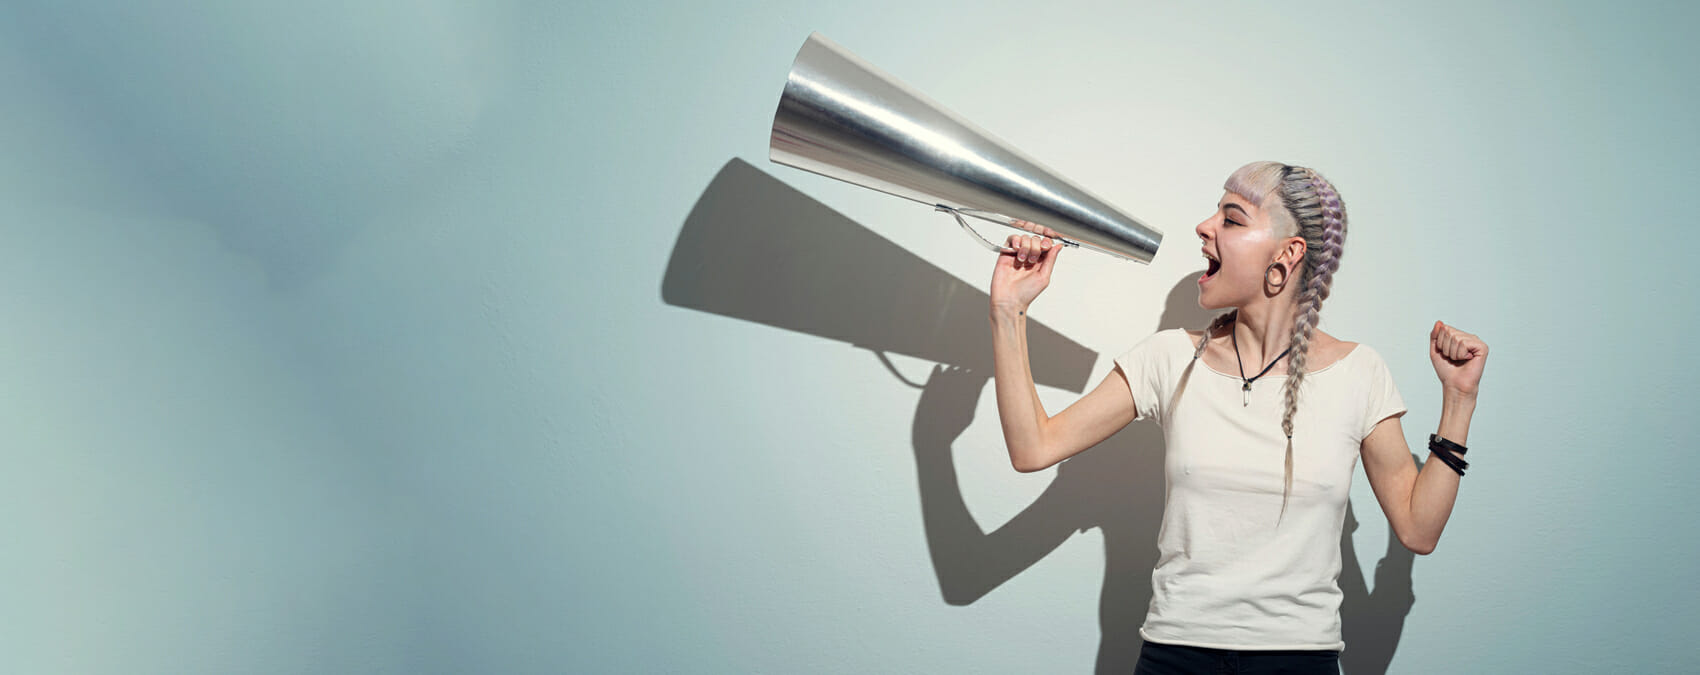 Young woman yelling into a megaphone